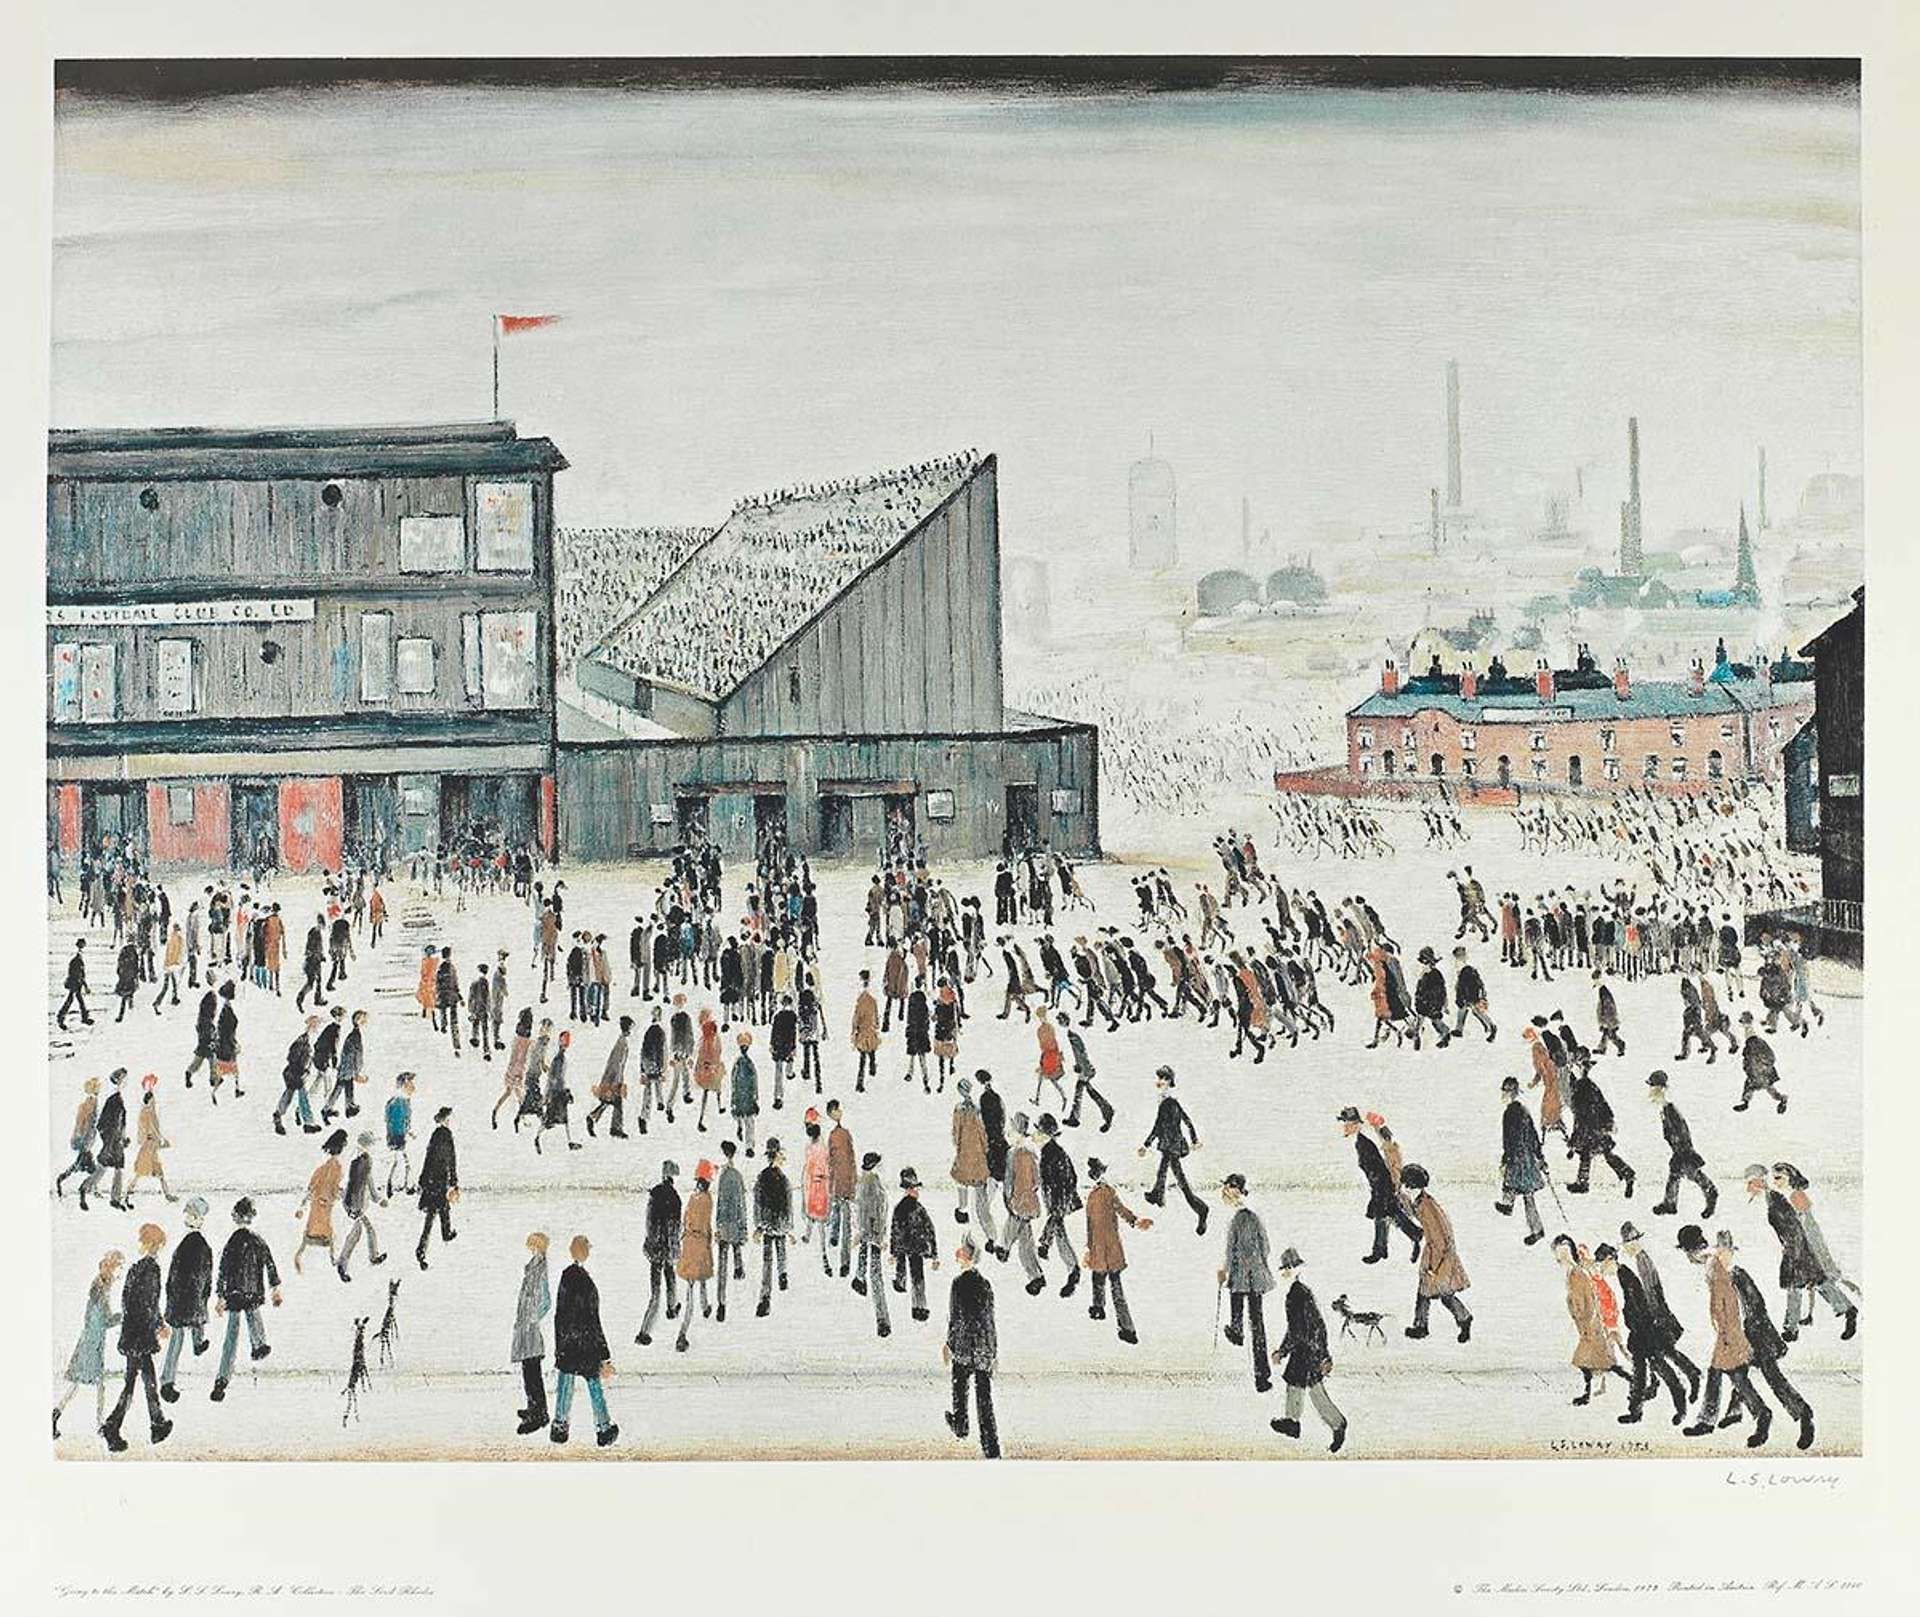 A scene depicting Lowry's iconic matchstick men, who promenade about in the foreground. In the background is the landscape of the football club located in Burnden Park.